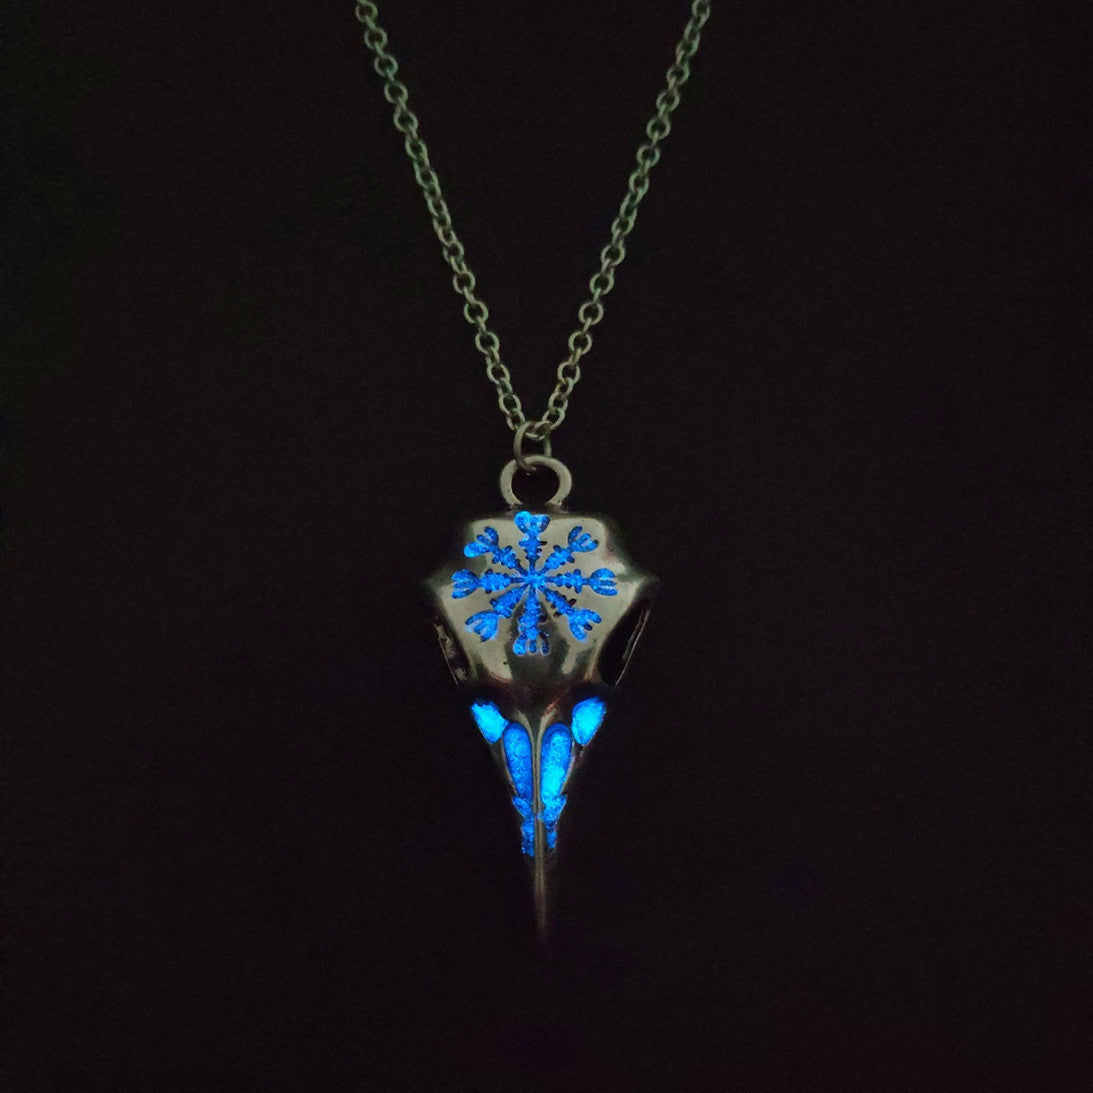 Crow Skull Glowing Necklace